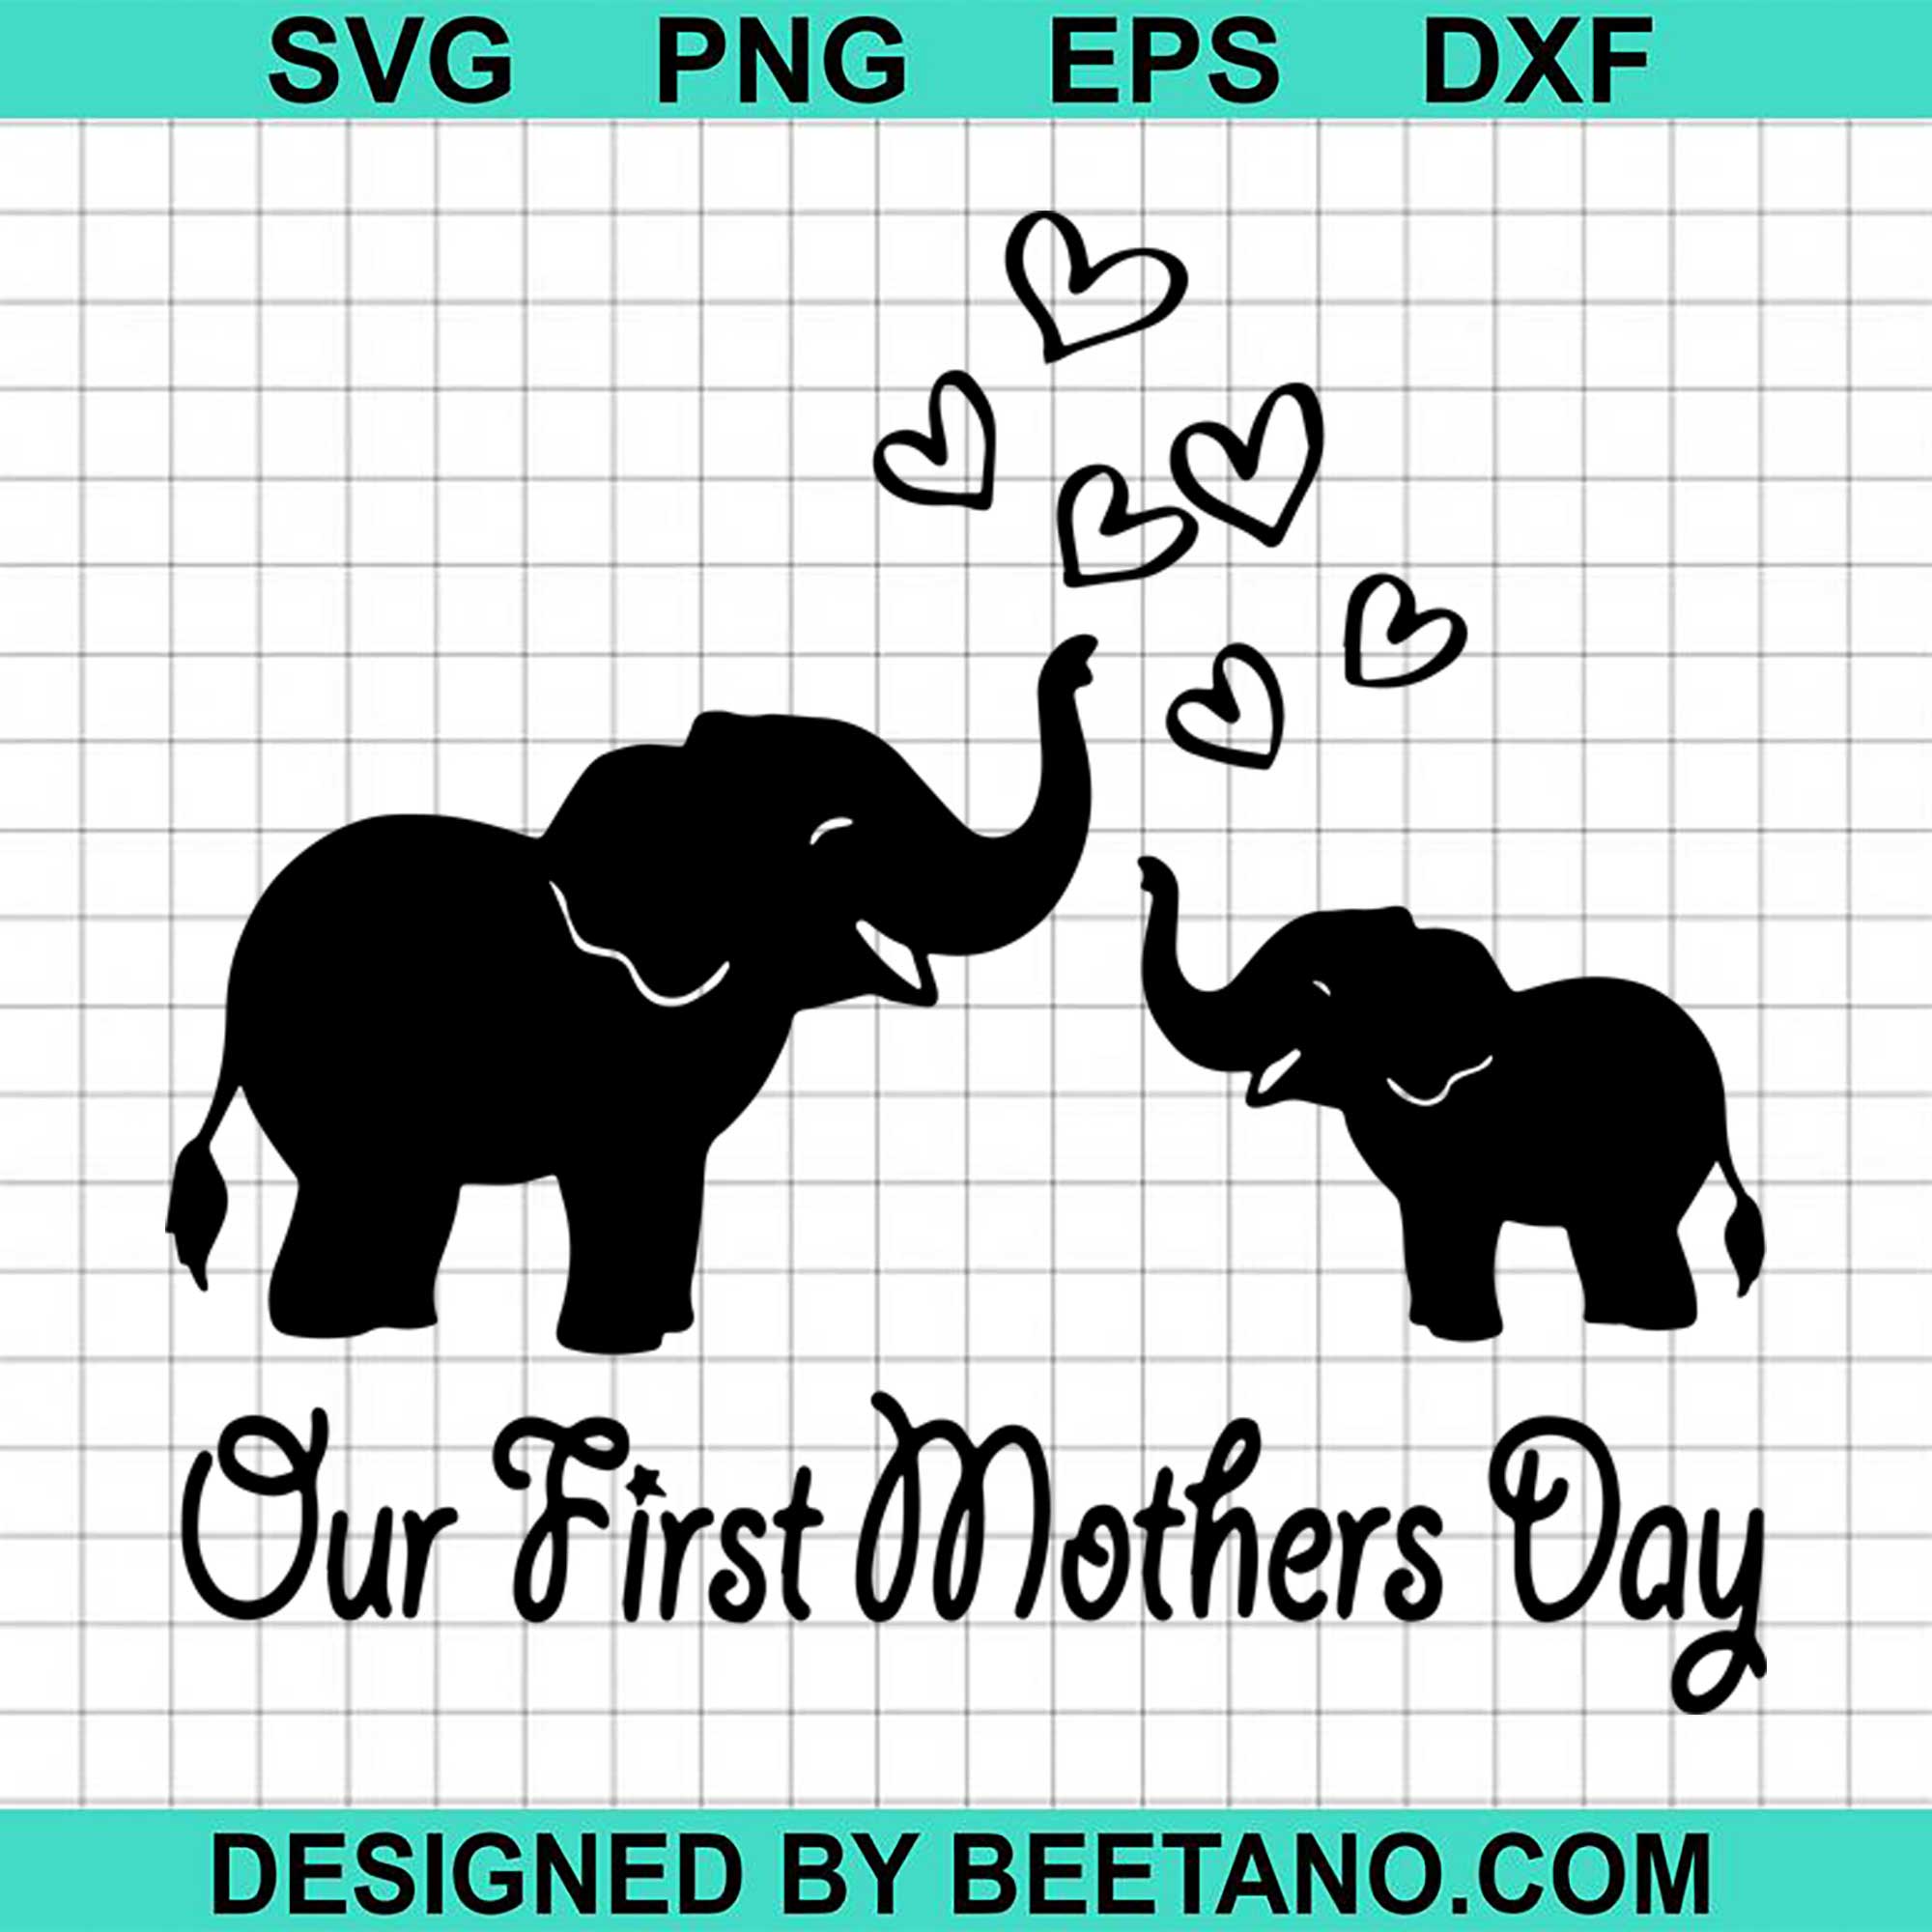 Download Elephant Matching Mom Baby Our First Mother Day Svg Cut File For Cricu Beetanosvg Scalable Vector Graphics